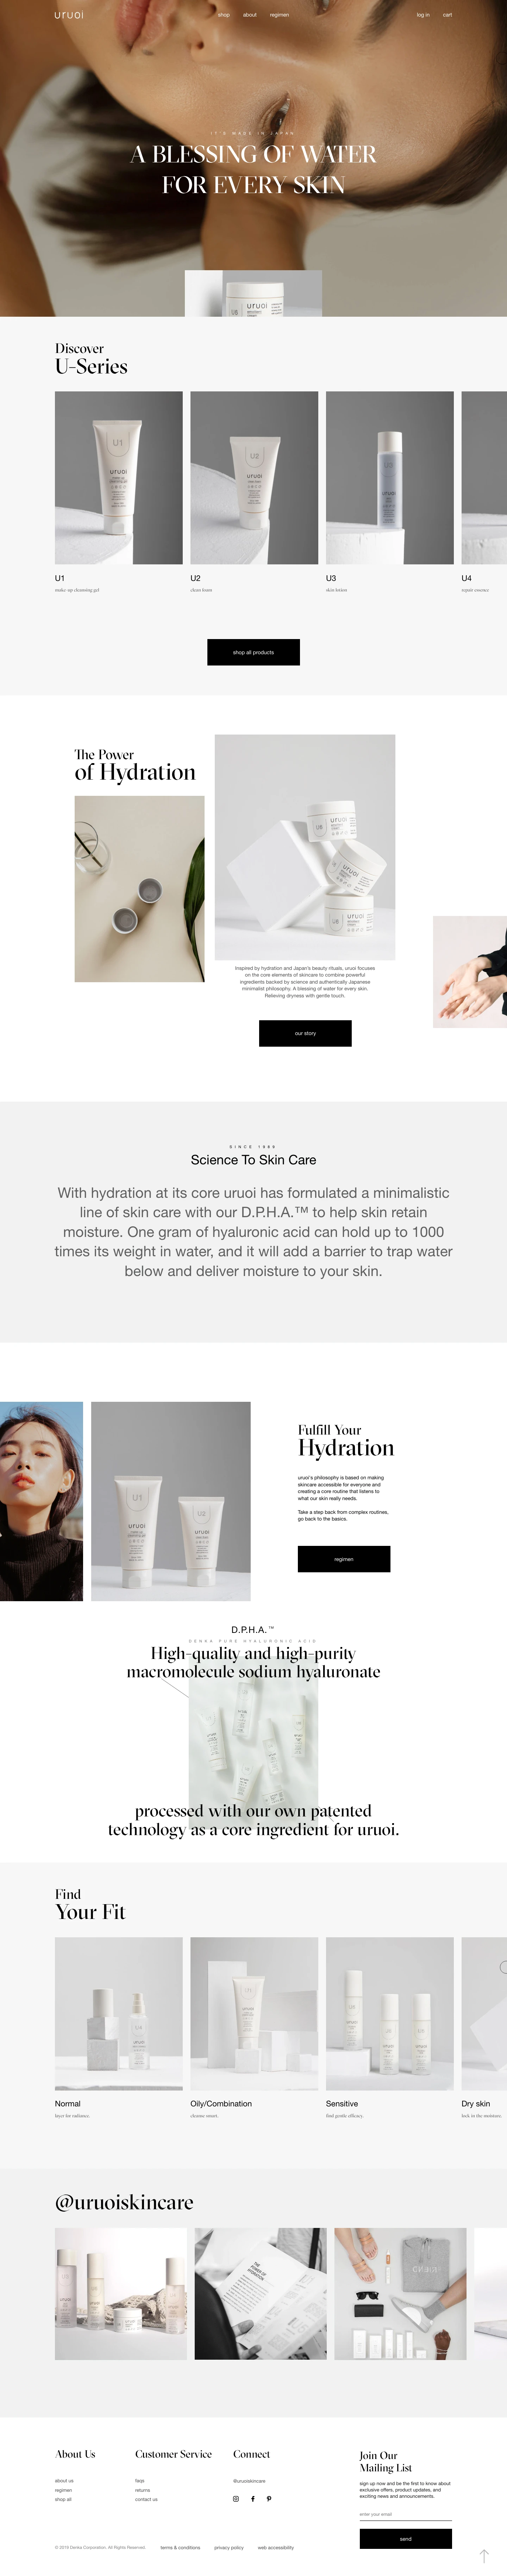 uruoi Landing Page Example: Uruoi concentrates on the core elements of skincare to combine an authentically Japanese minimalist philosophy and powerful ingredients backed by science.